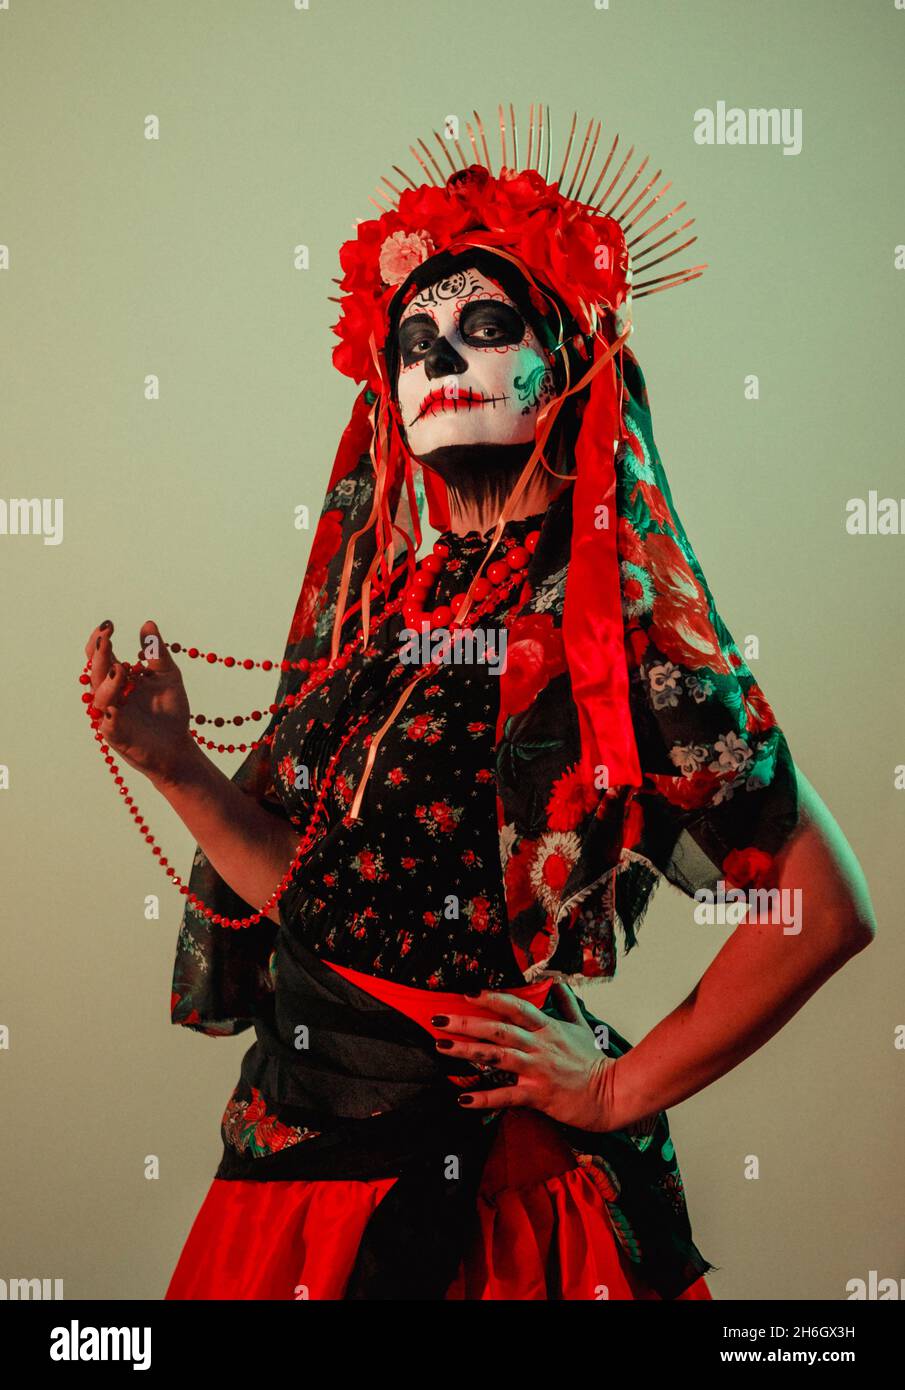 Young woman in calavera style with Mexican skull make-up on her face Stock  Photo - Alamy